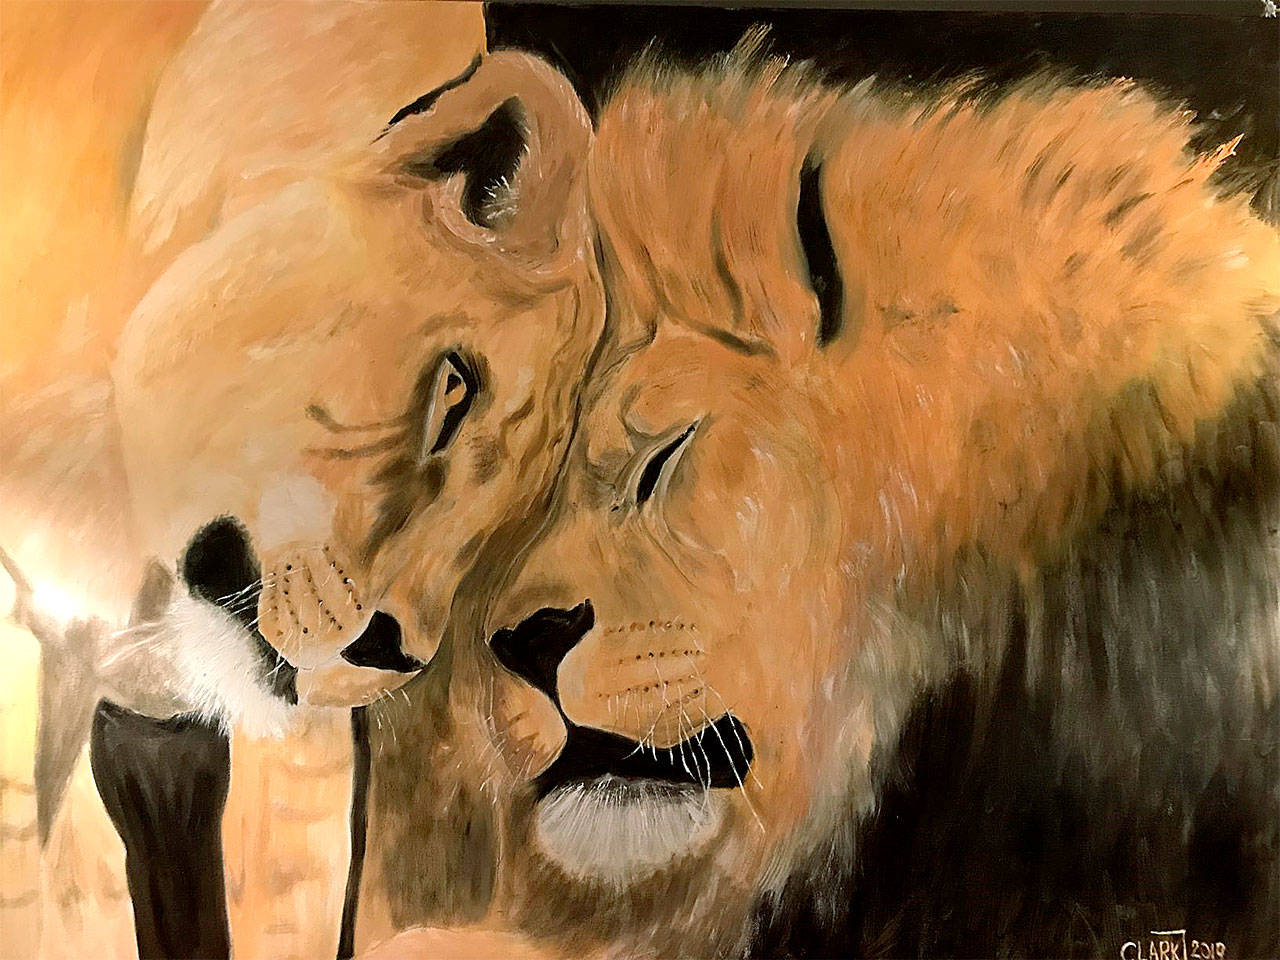 New art exhibition at the Bainbridge Public Library features animals and people